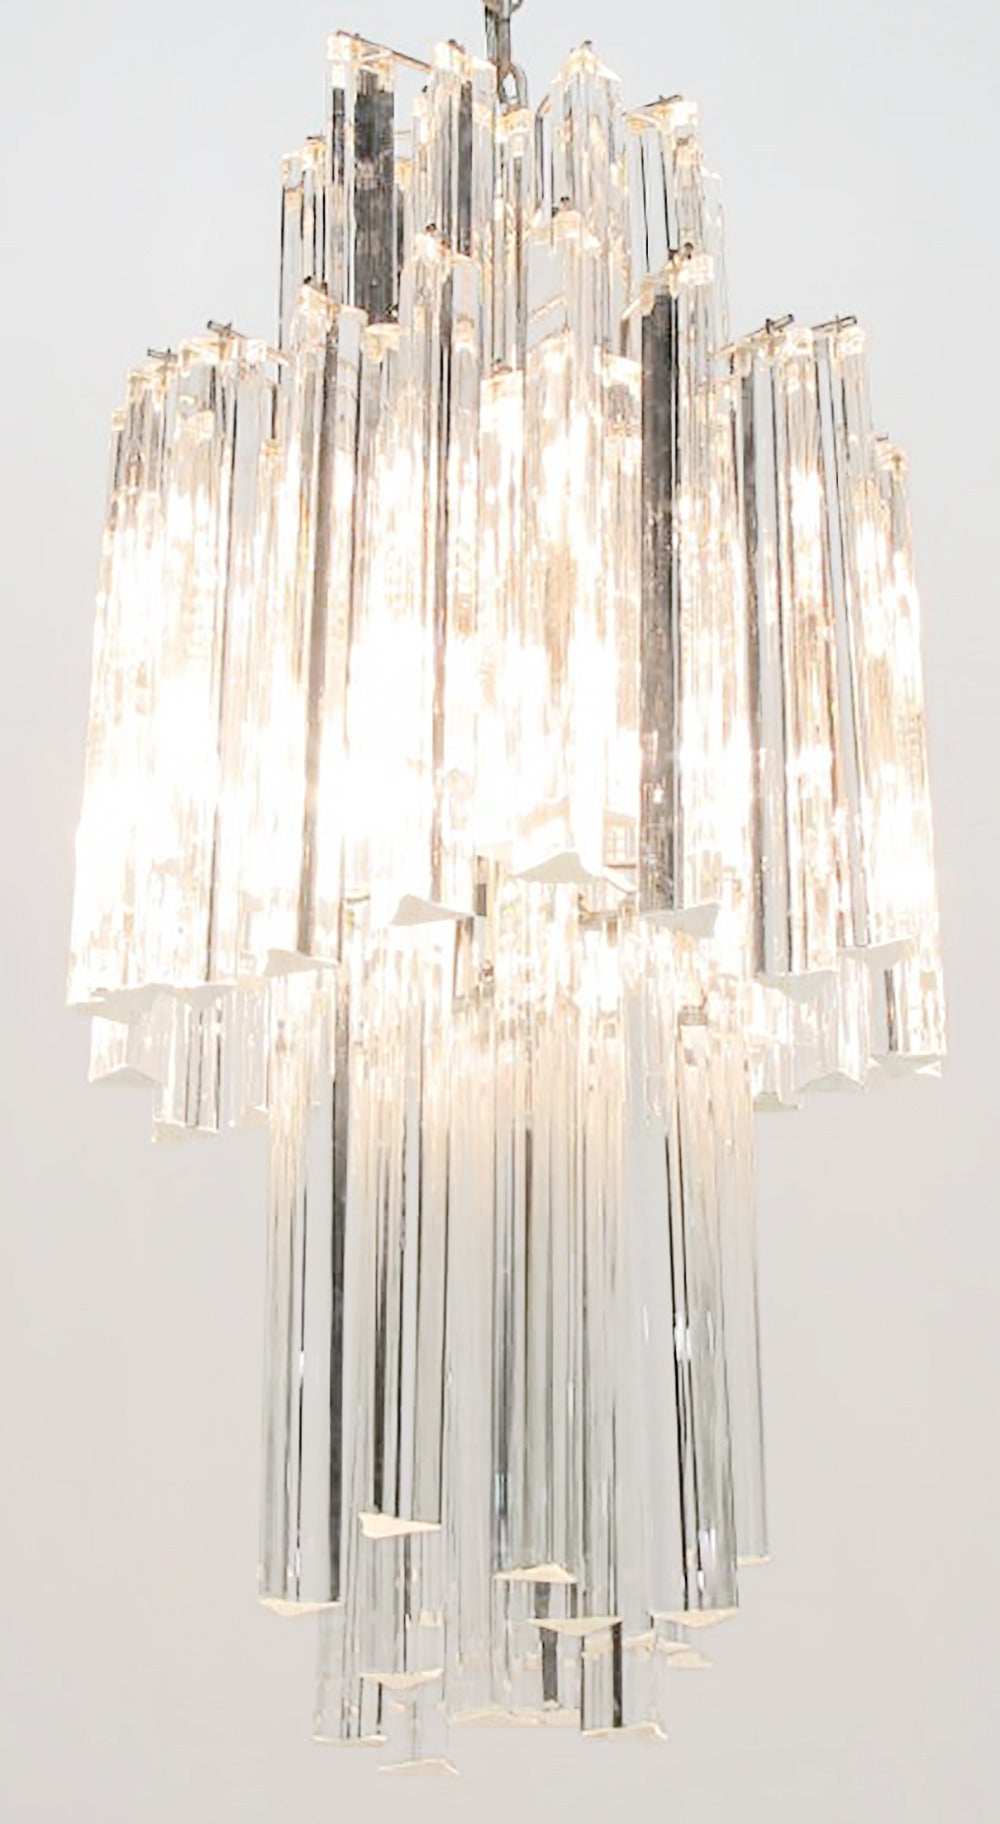 Nickeled steel frame Venini chandelier with 11